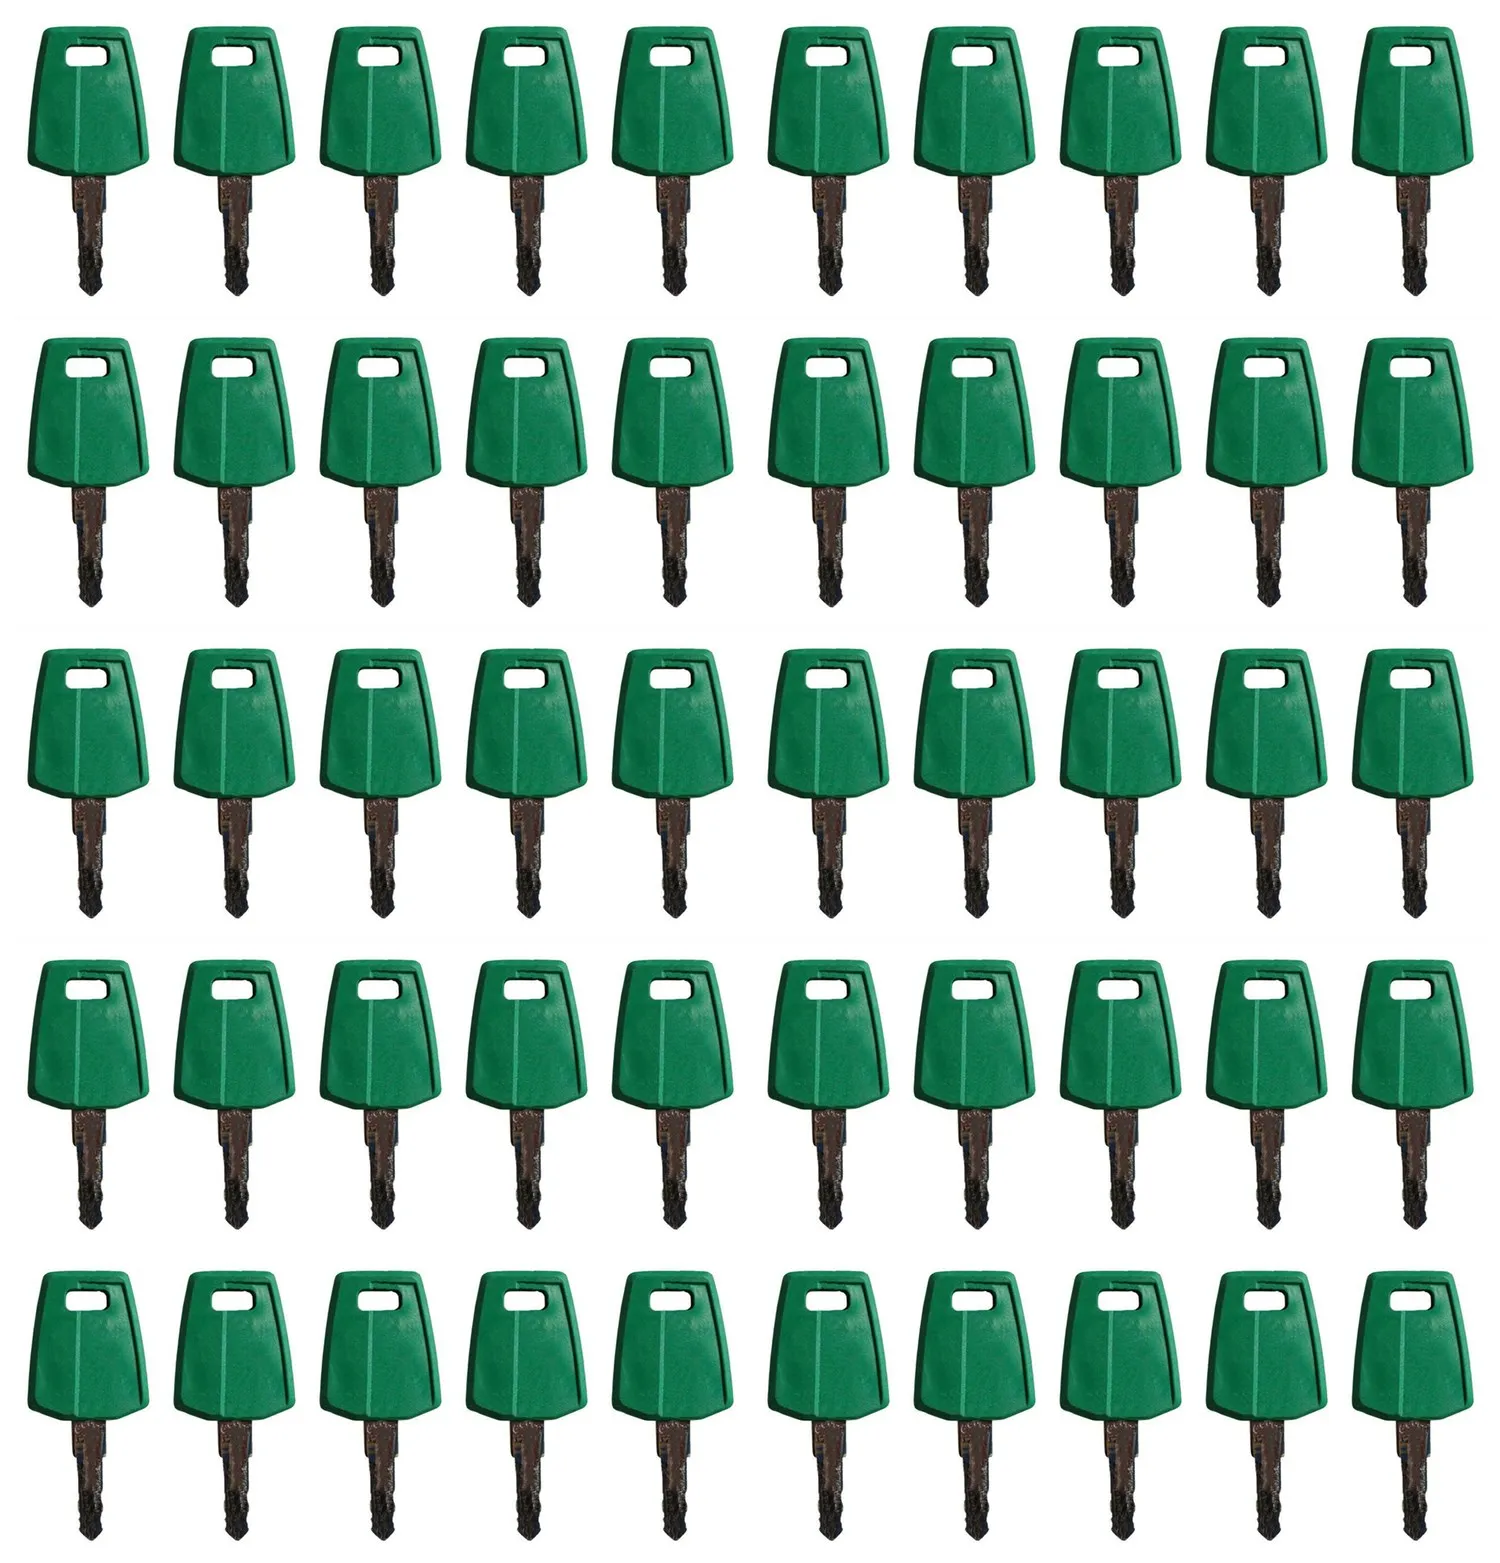 50pc 11444208 C001 Ignition Key For Volvo Heavy Equipment Wheel Loader For Volvo F series wheeled loaders